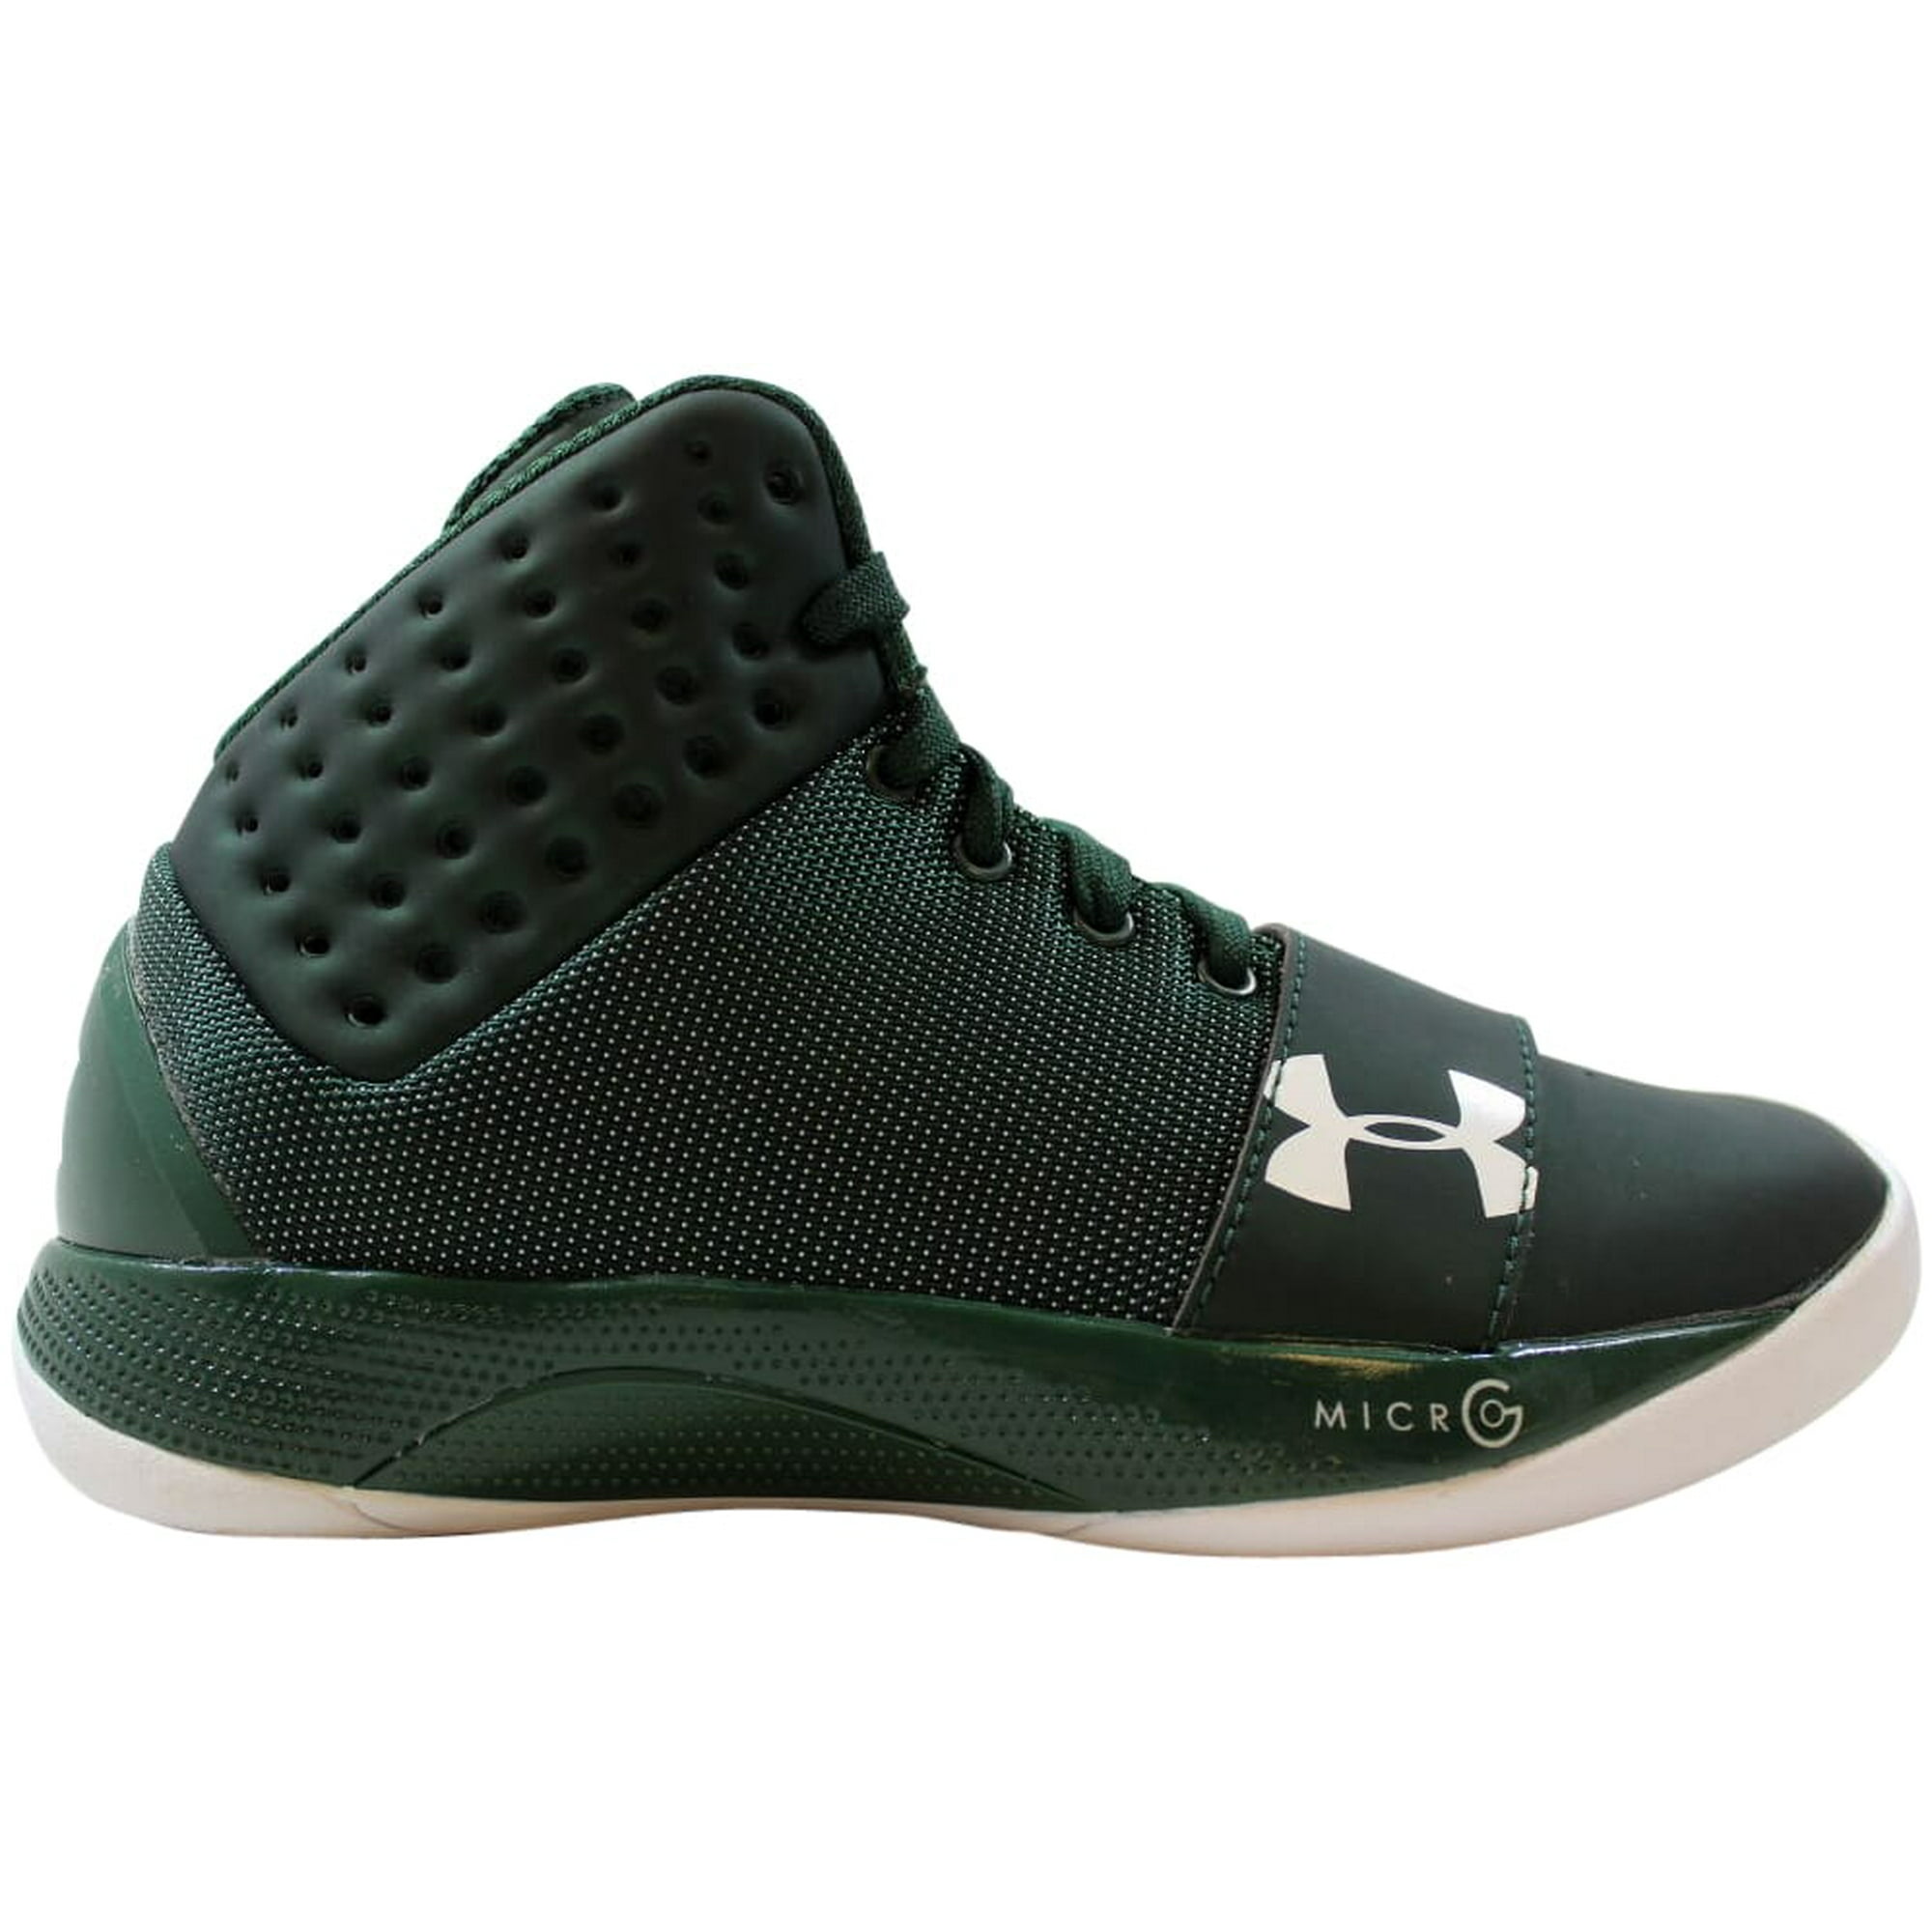 Under Armour Micro G Funk - Four Colorways Available